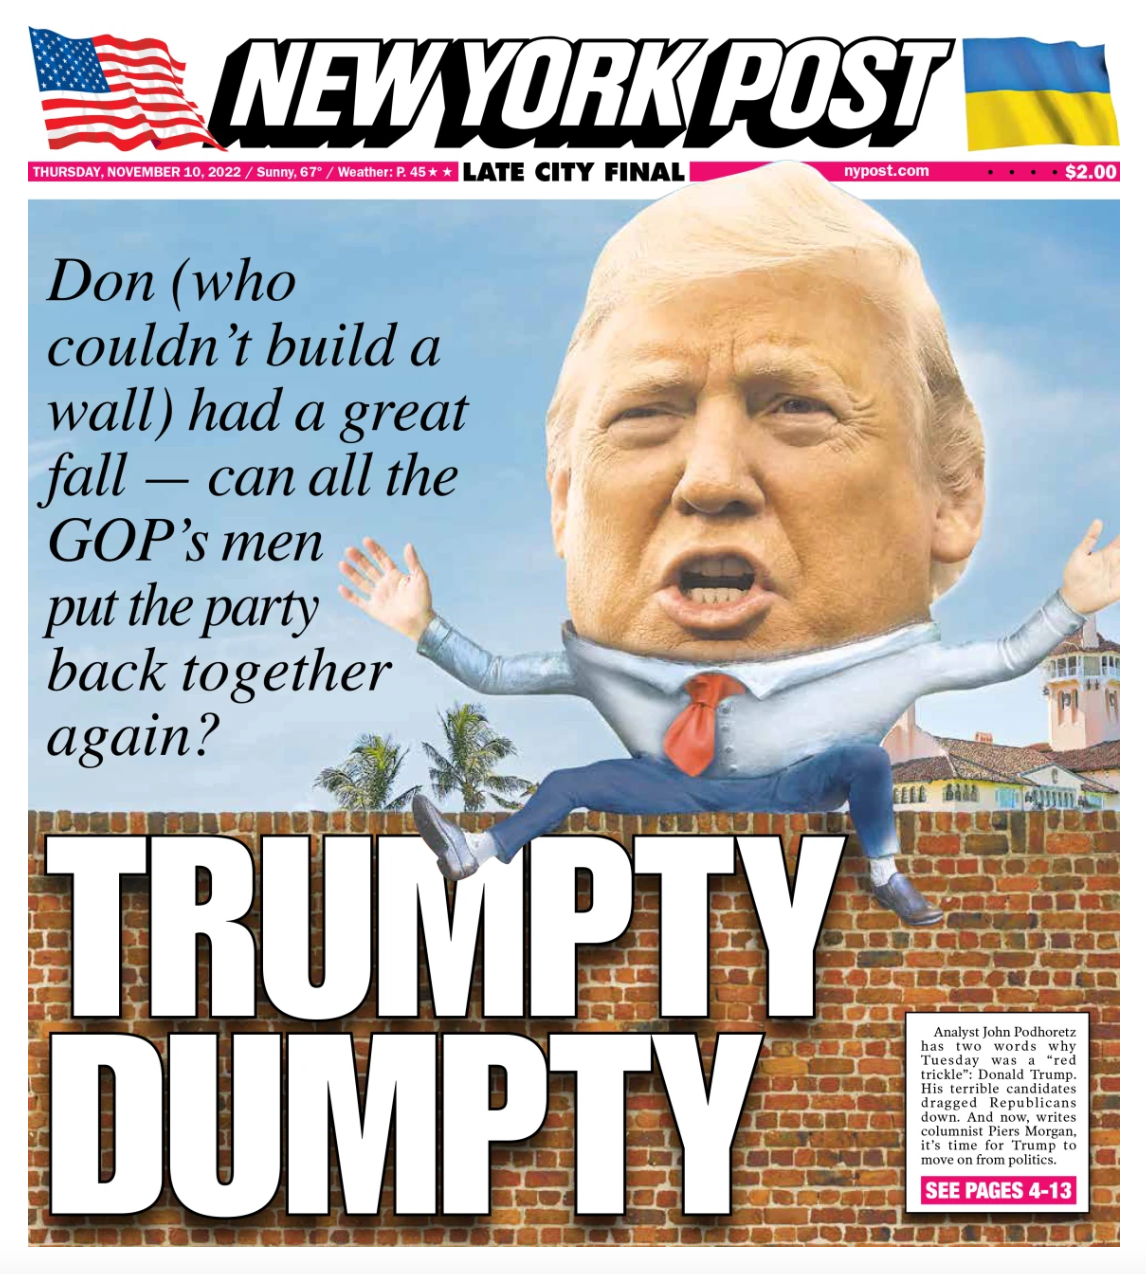 The New York Post’s front cover on Thursday